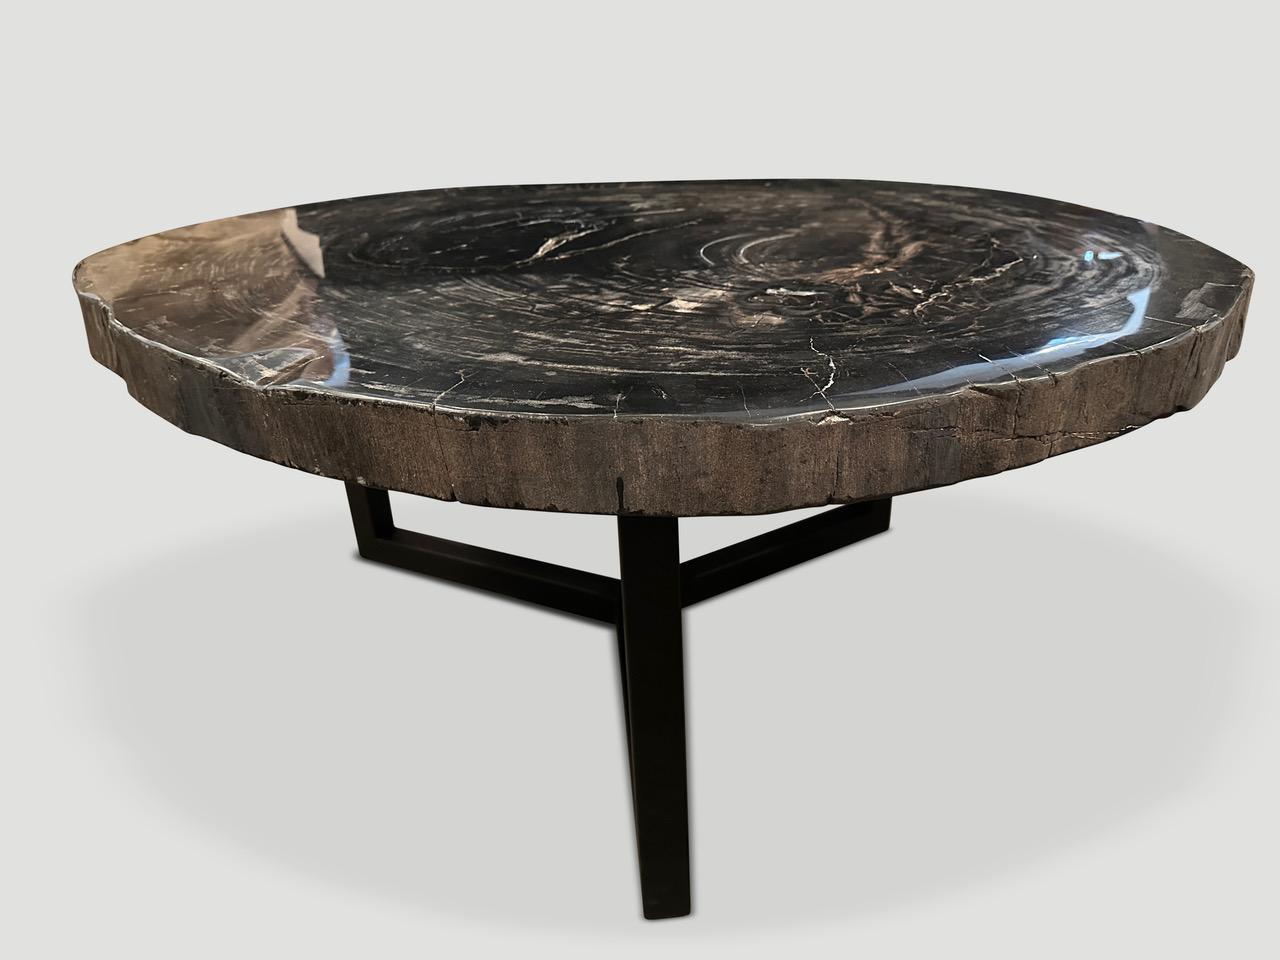 Stunning rare blue black tones on this petrified wood slab coffee table. This large impressive slab is floating on a minimalist metal base. Contrasting white markings and natural crystals are embedded on the top. We polished the top and left the